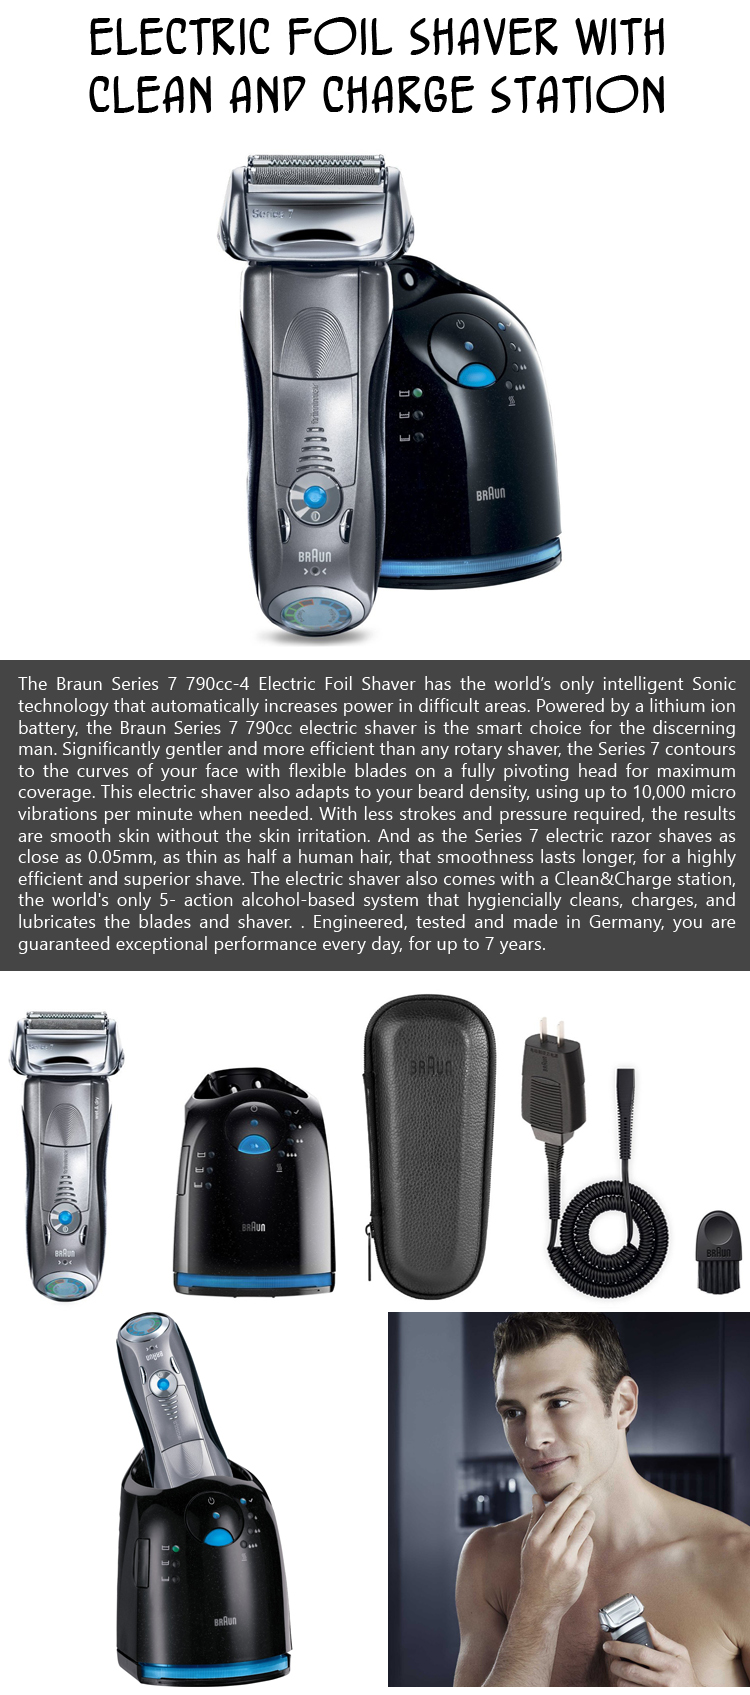 Electric Foil Shaver with Clean and Charge Station